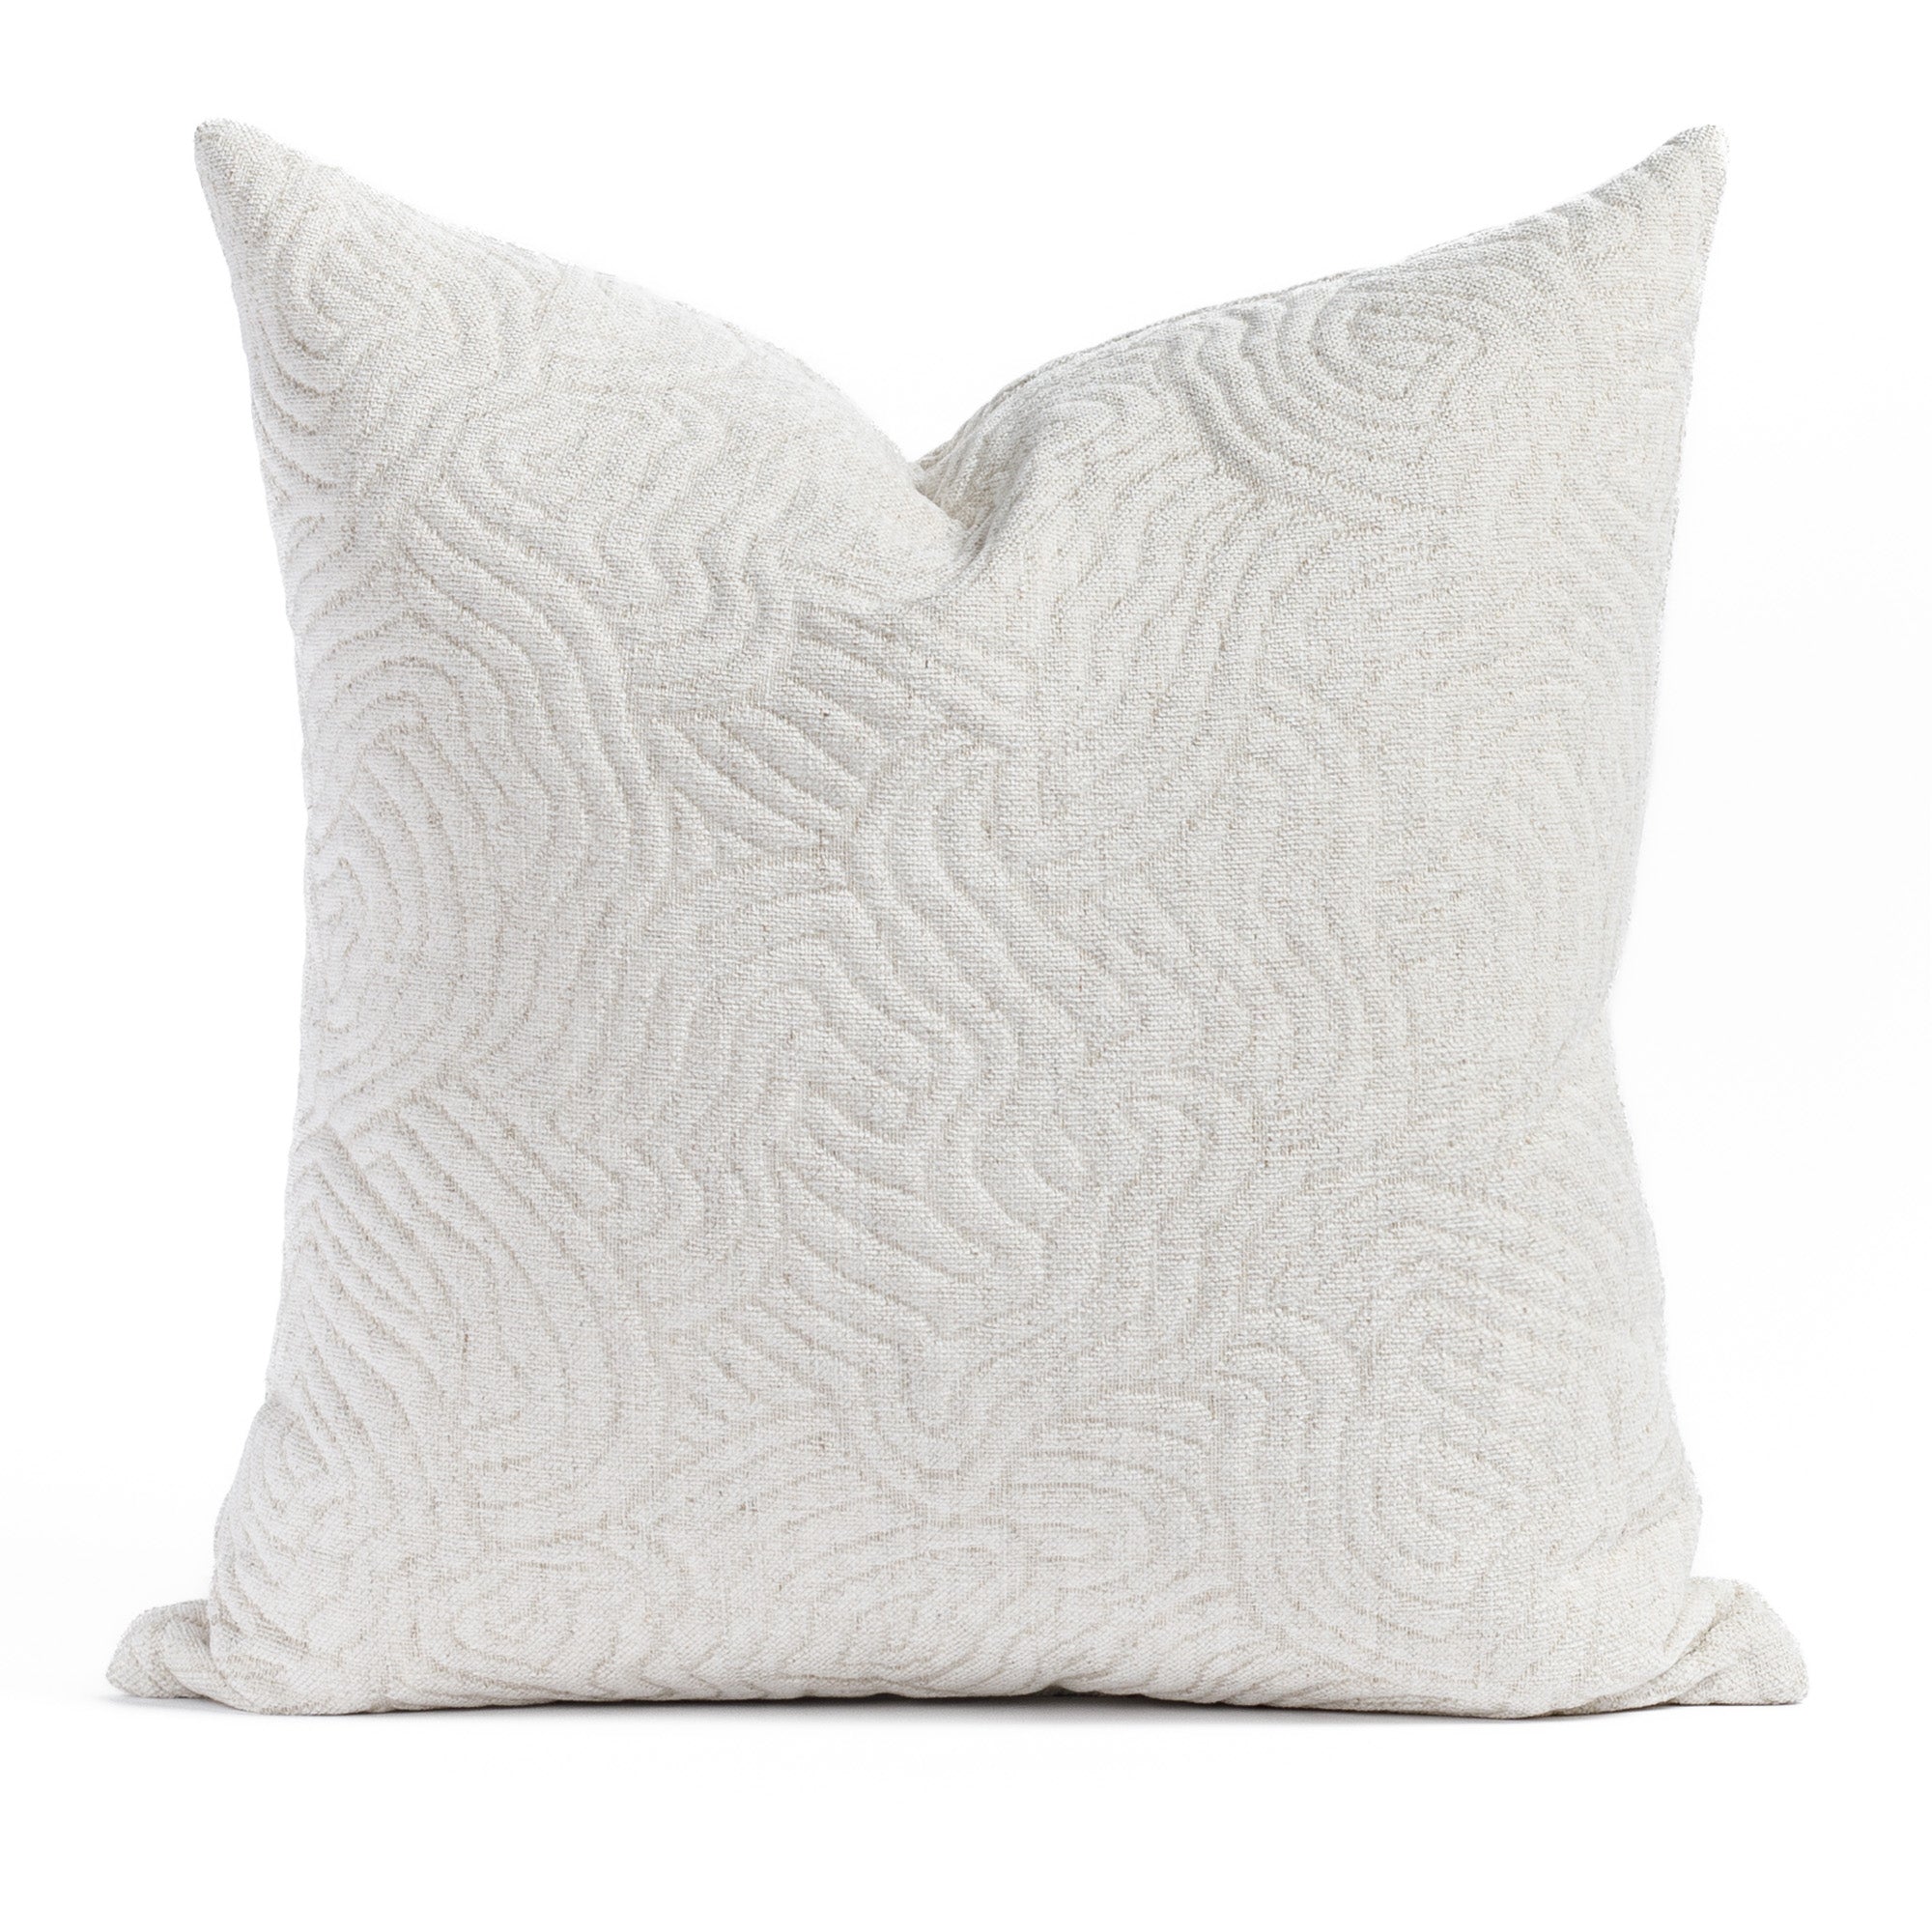 Quince 22x22 Pillow Pearl, a quilted white abstract patterned pillow from Tonic Living